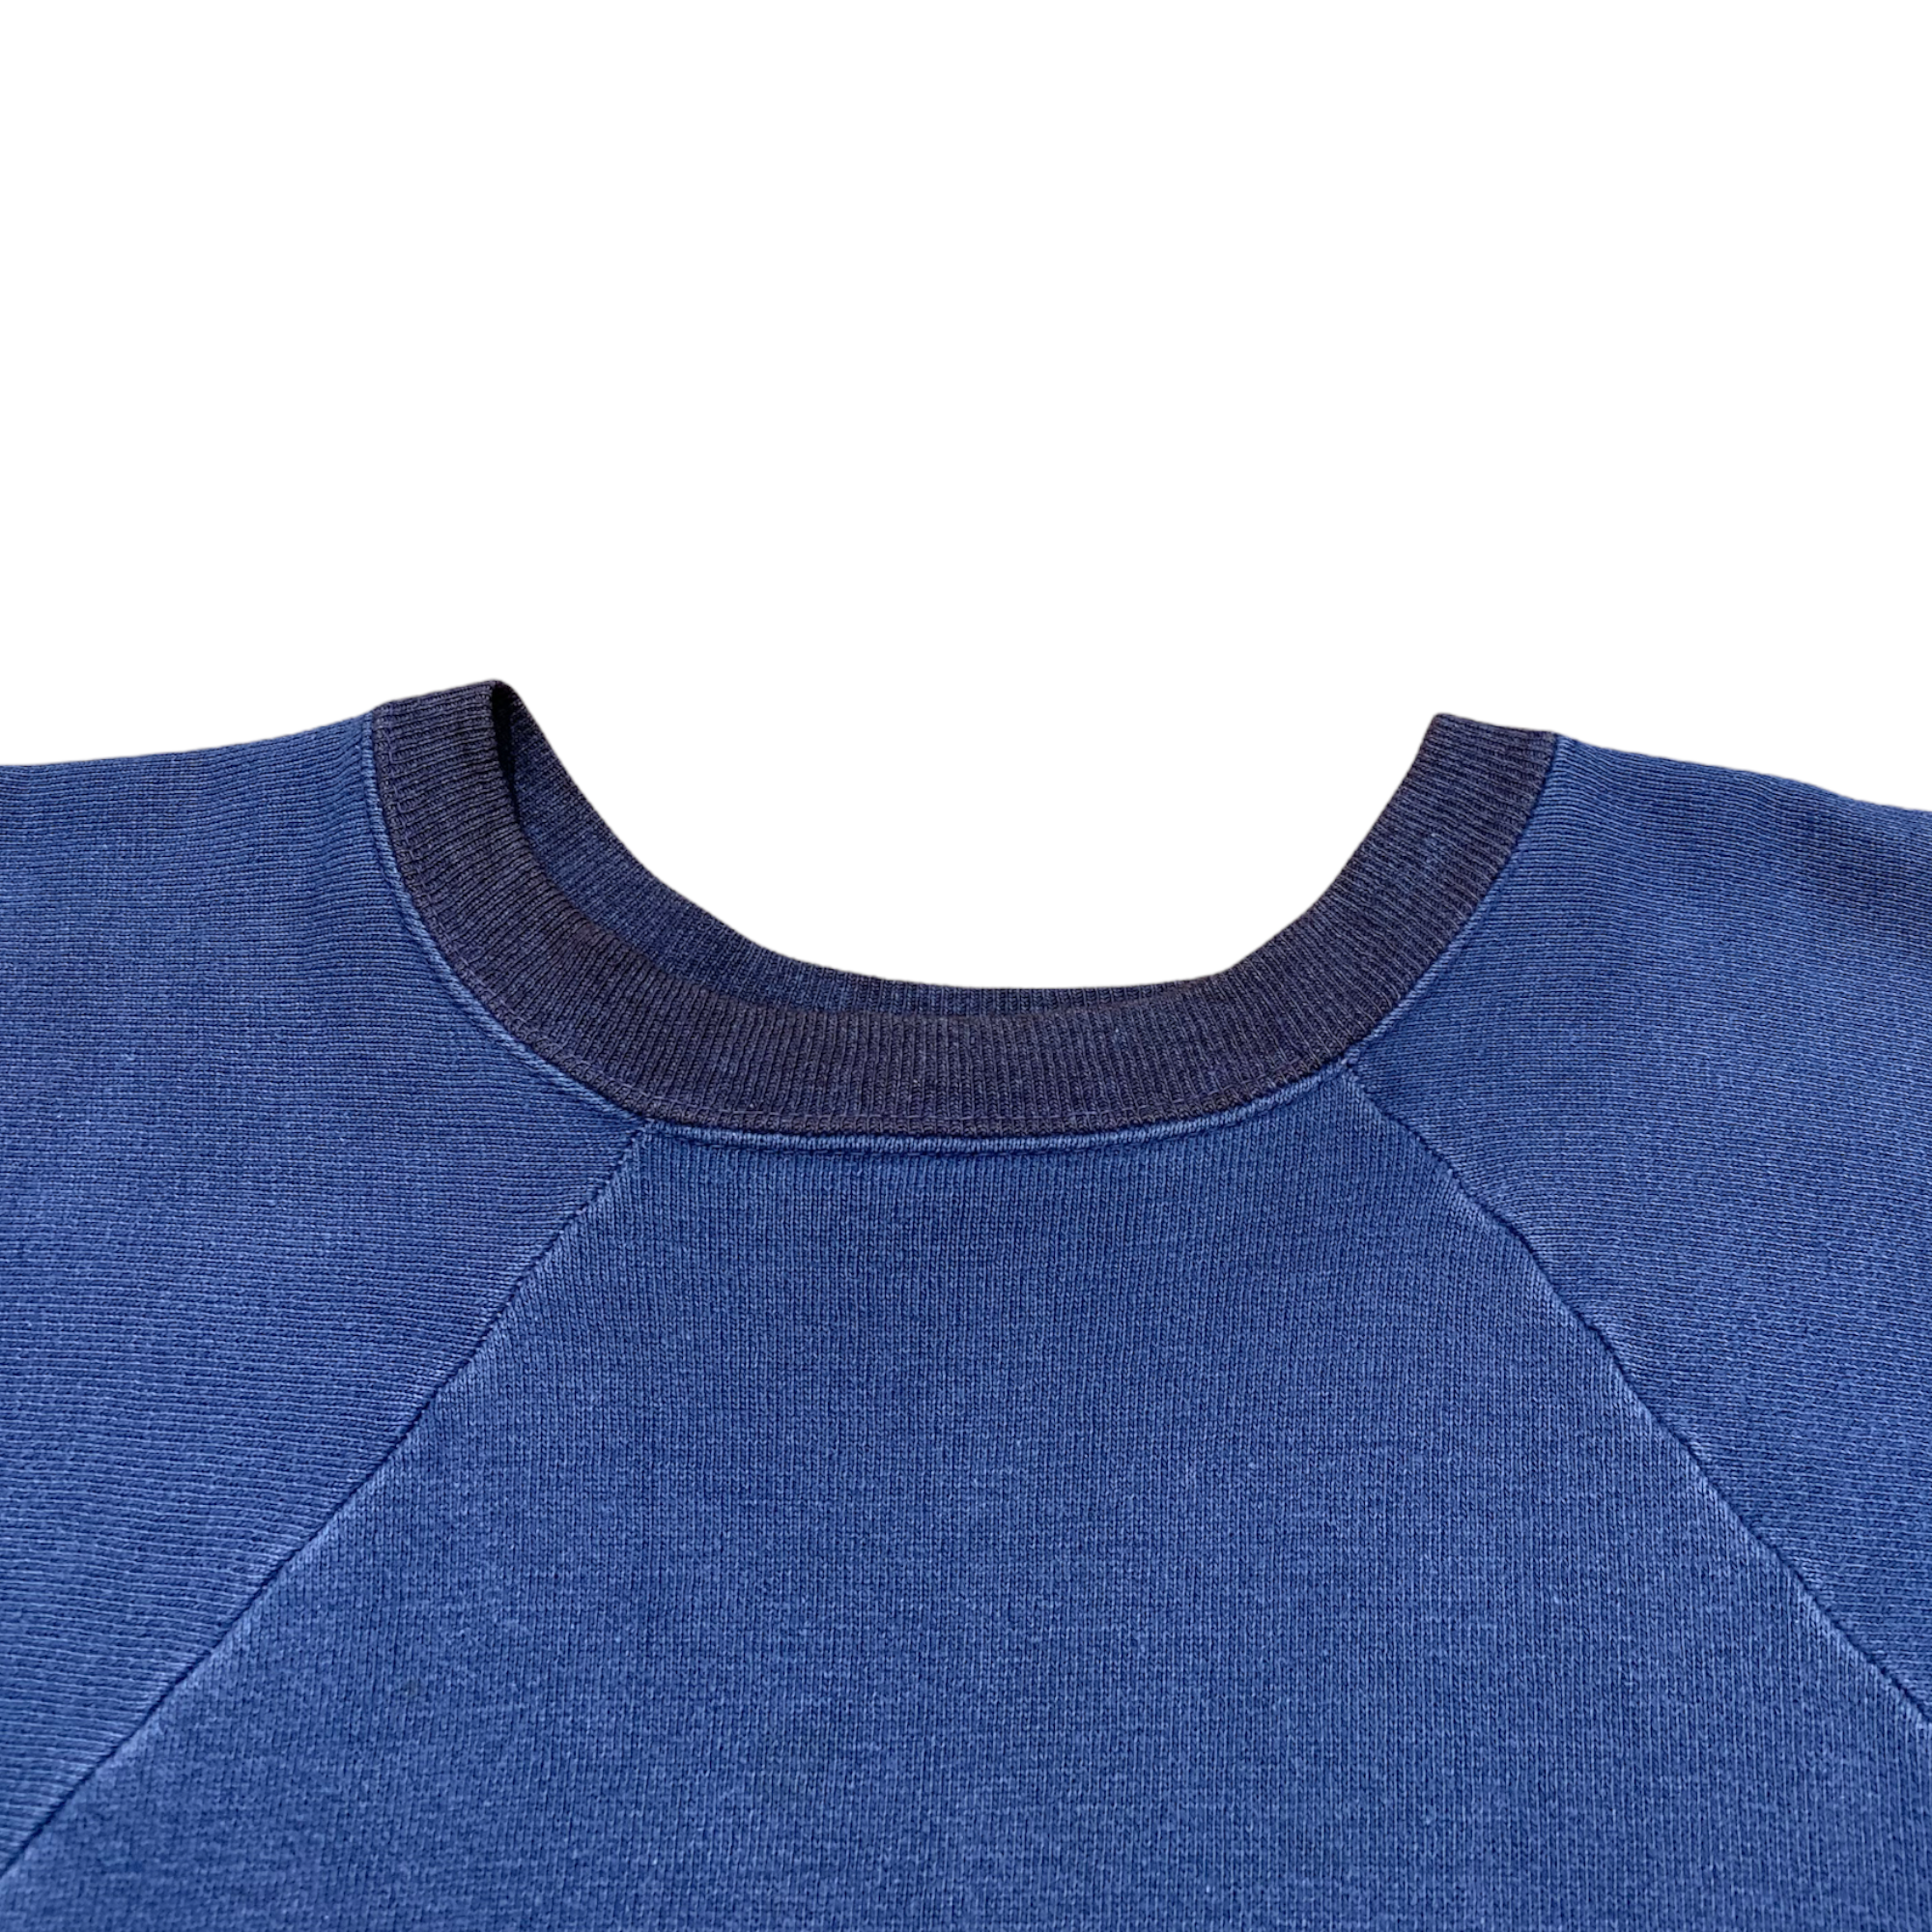 70s Hanes Two-Tone Crewneck with Cut Sleeves - Blue/Navy - XS/S